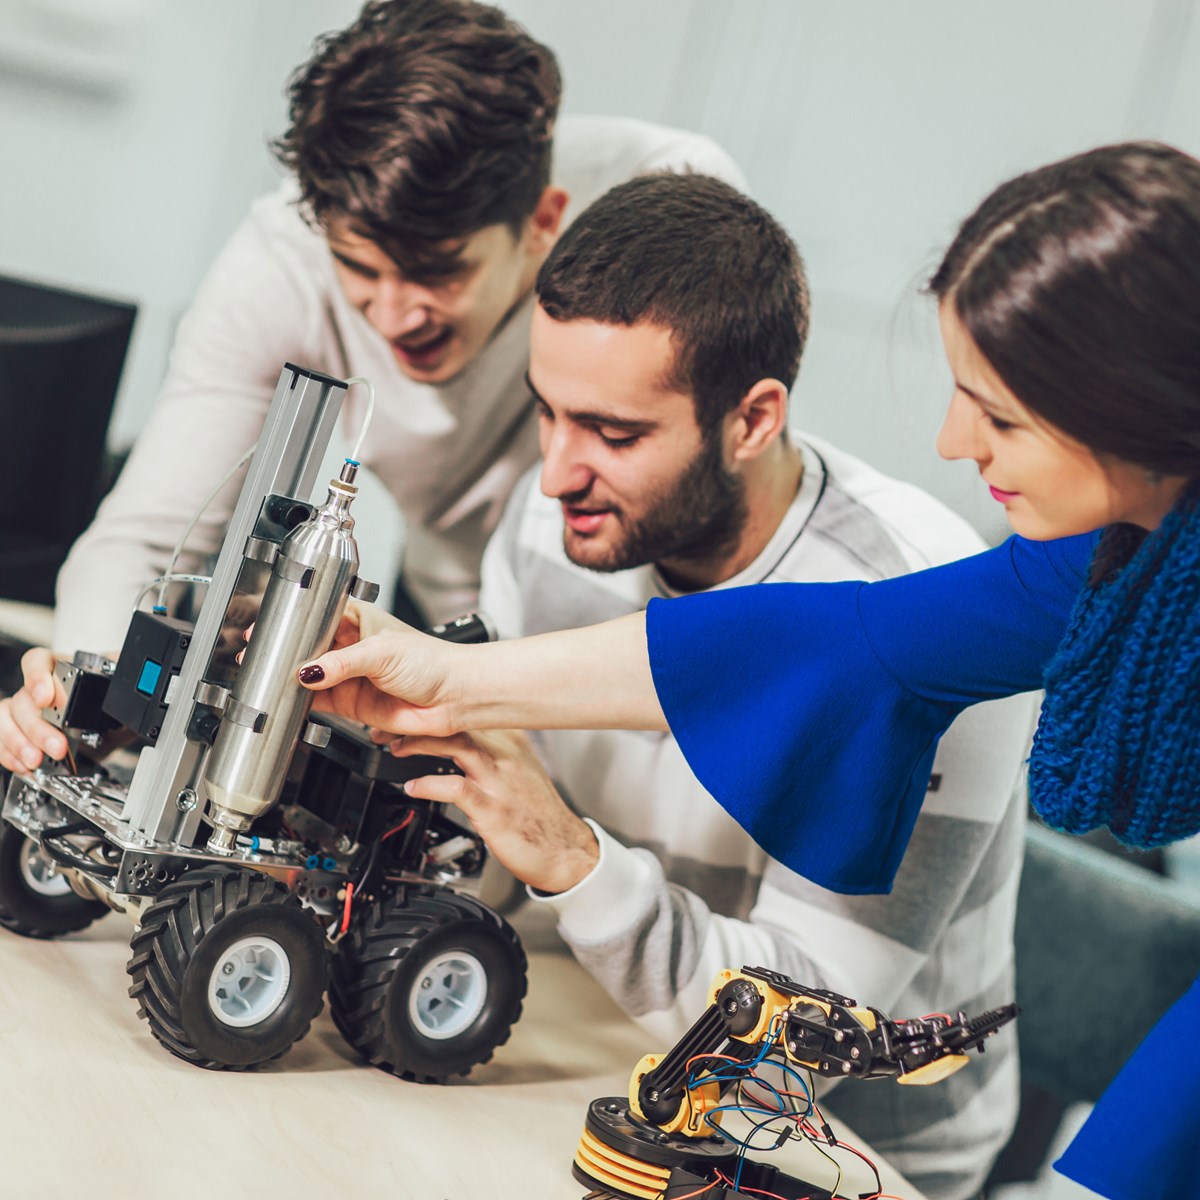 Three industrial engineering students working on and looking at a robotic device